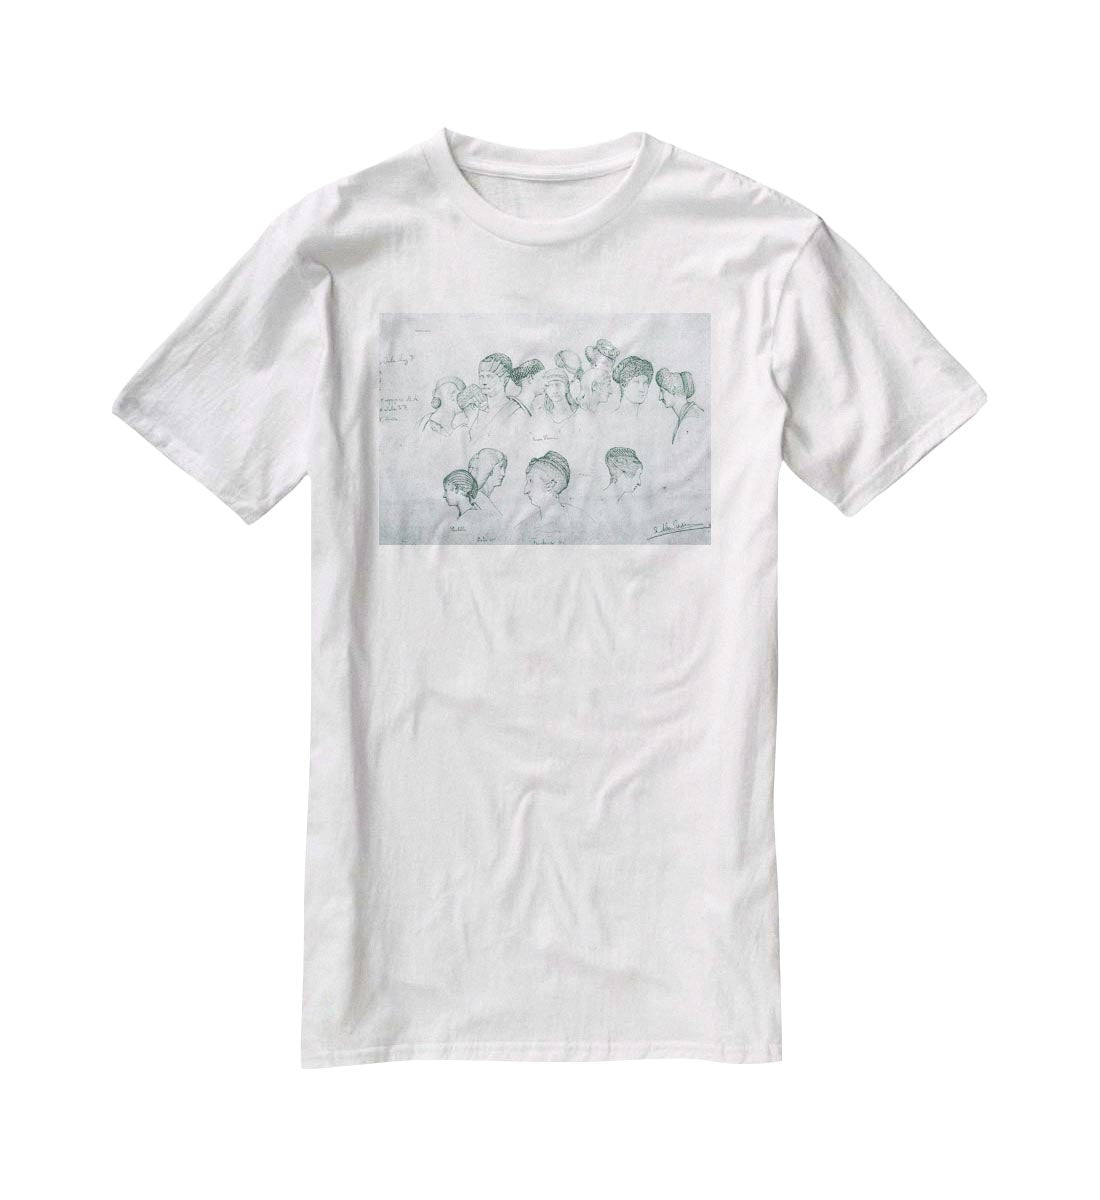 Sketch of hairstyles from ancient sculptures by Alma Tadema T-Shirt - Canvas Art Rocks - 5